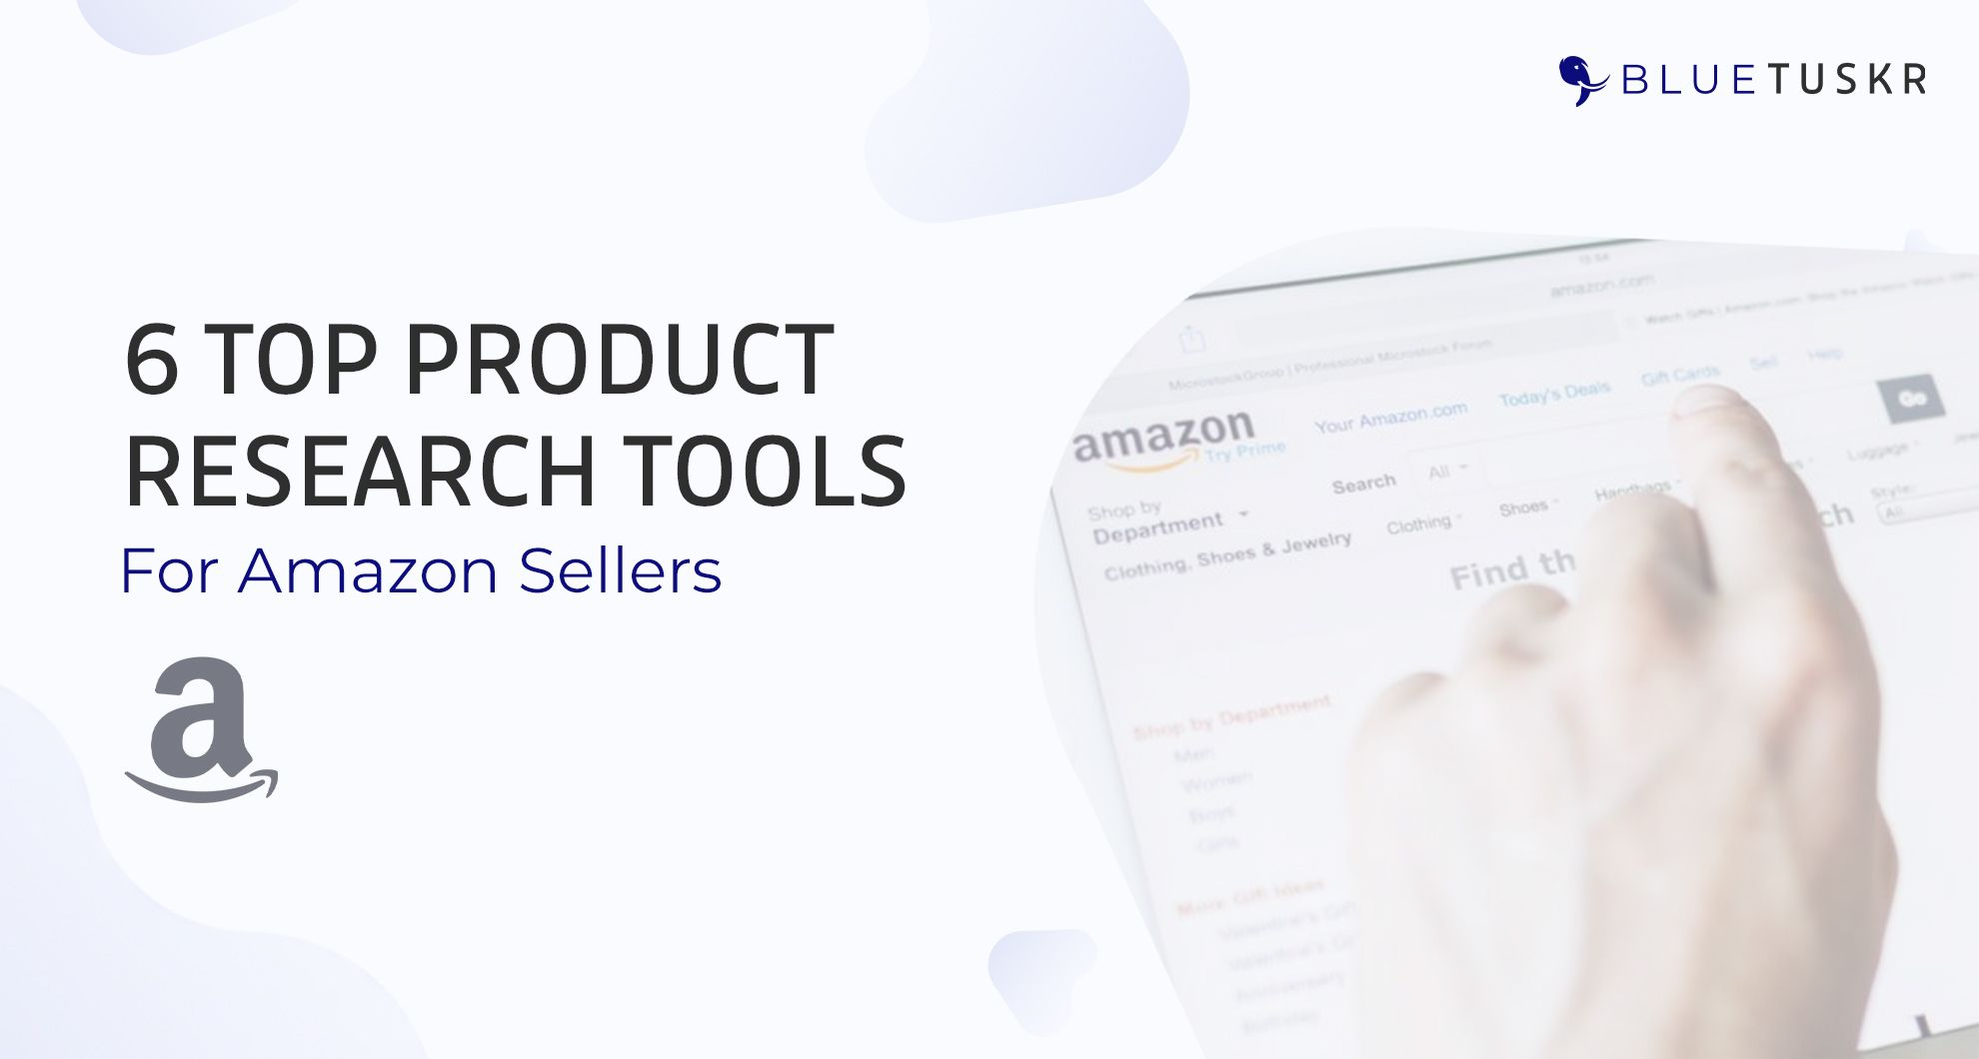 6 Top Product Research Tools for Amazon Sellers